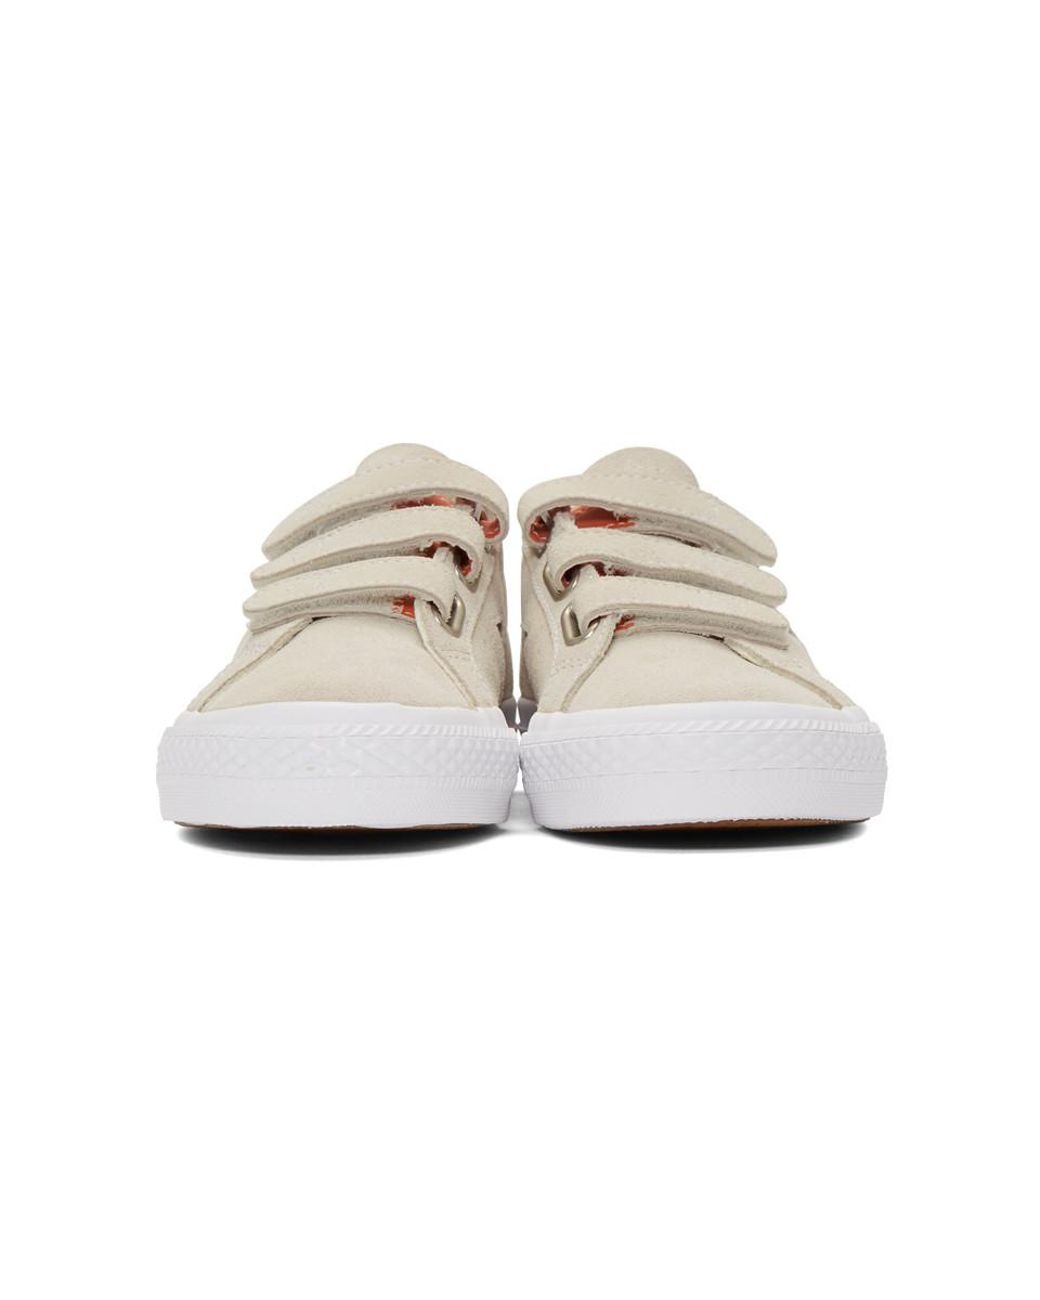 Converse Off-white Suede One Star Pro Sneakers for Men | Lyst